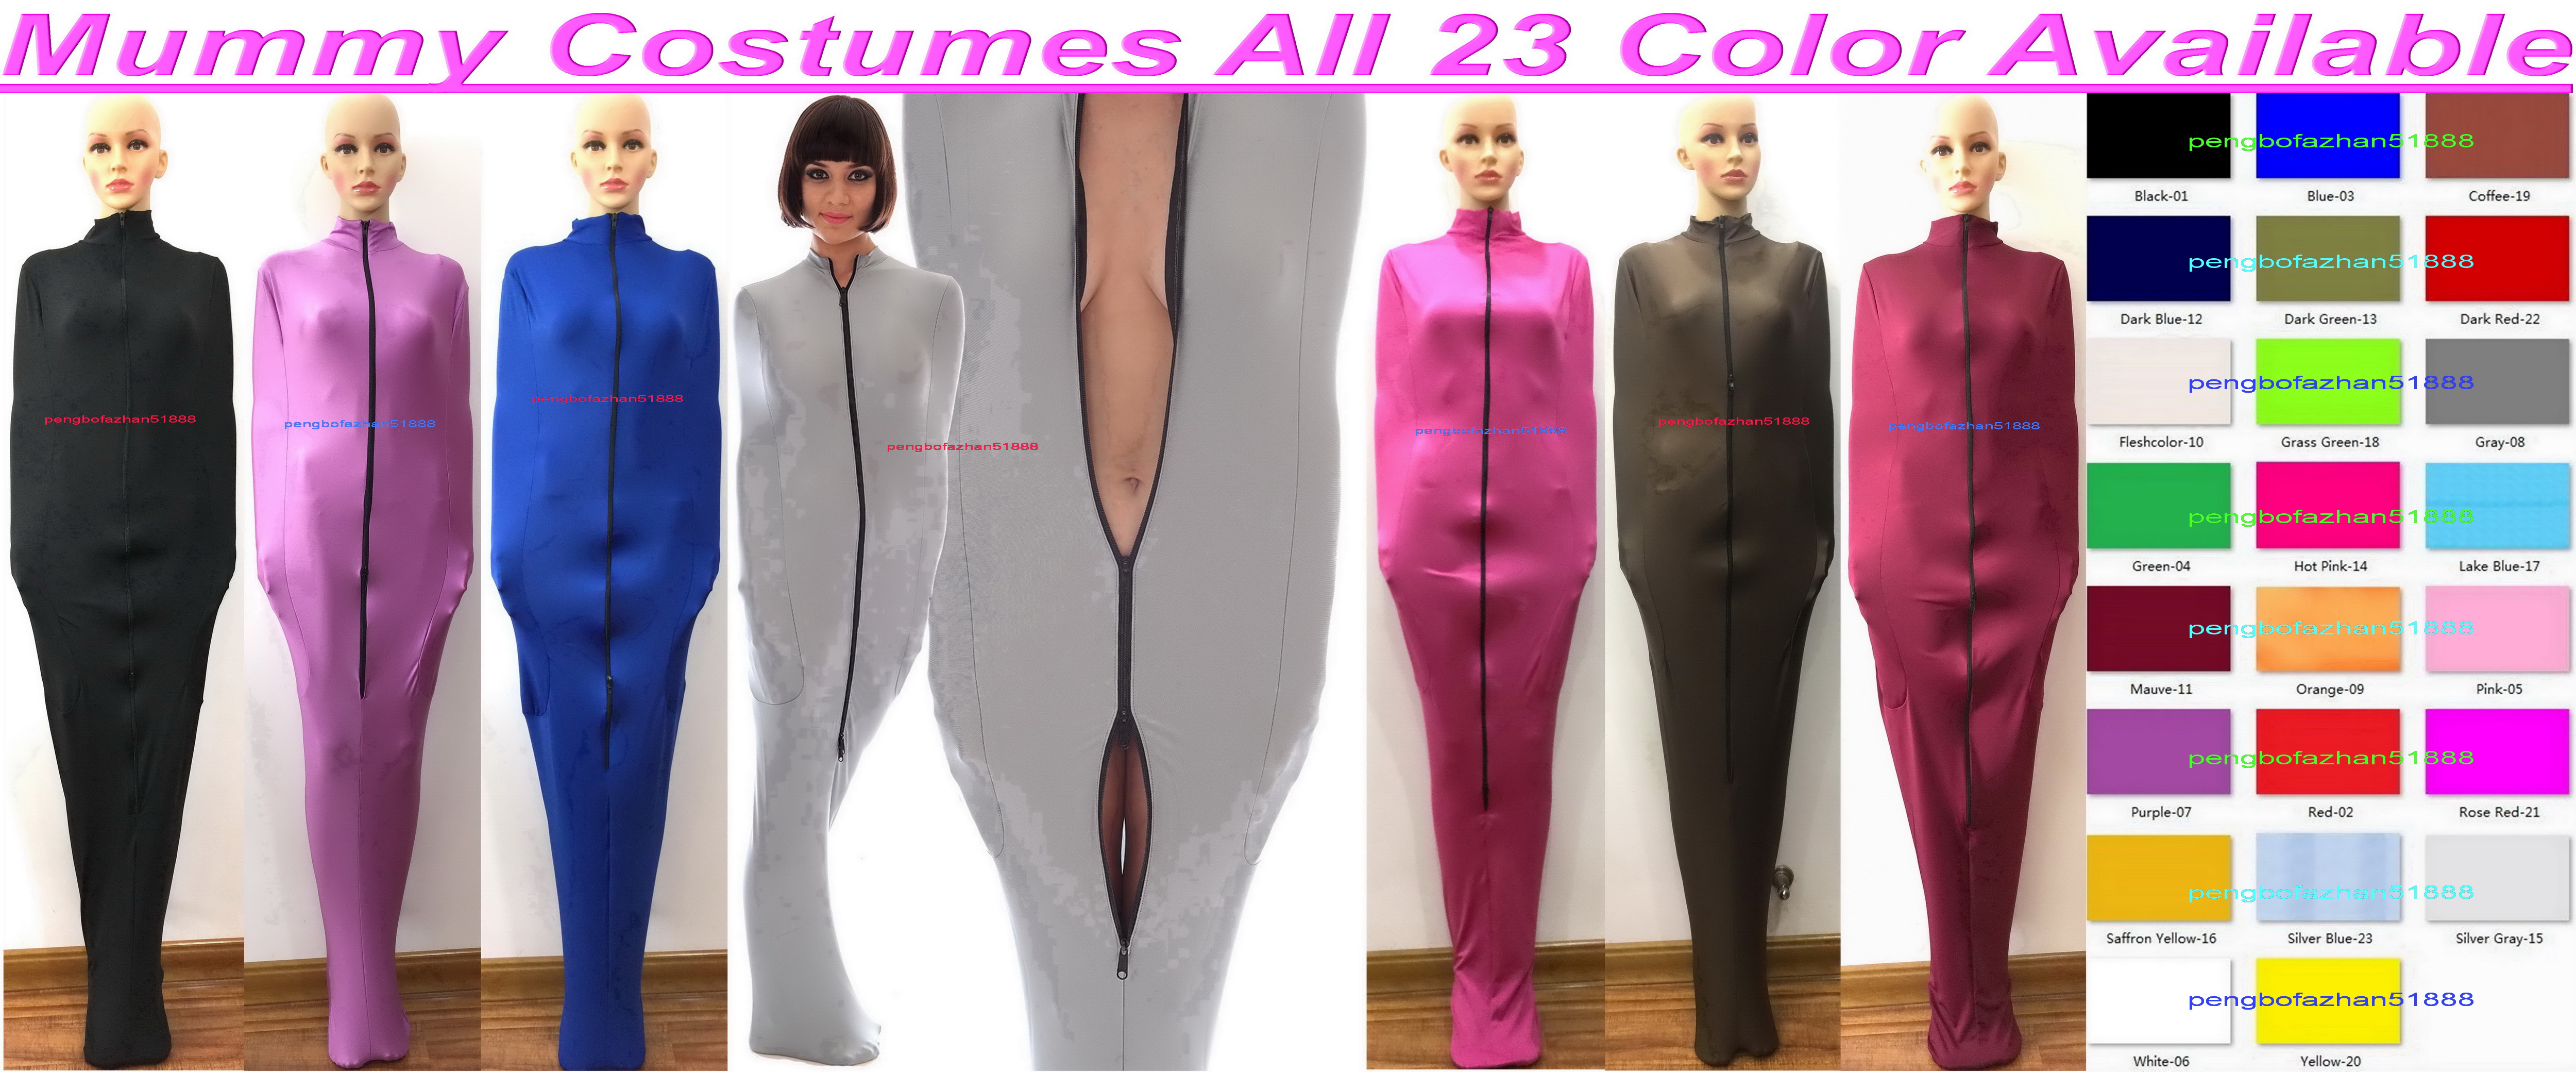 

Sexy 23 Color Lycra Spandex Mummy Costumes Sleeping Bag With internal Arm Sleeves Unisex Body Bags Sleepsacks Tights Catsuit Outfit Halloween Cosplay Suit P313, Pink